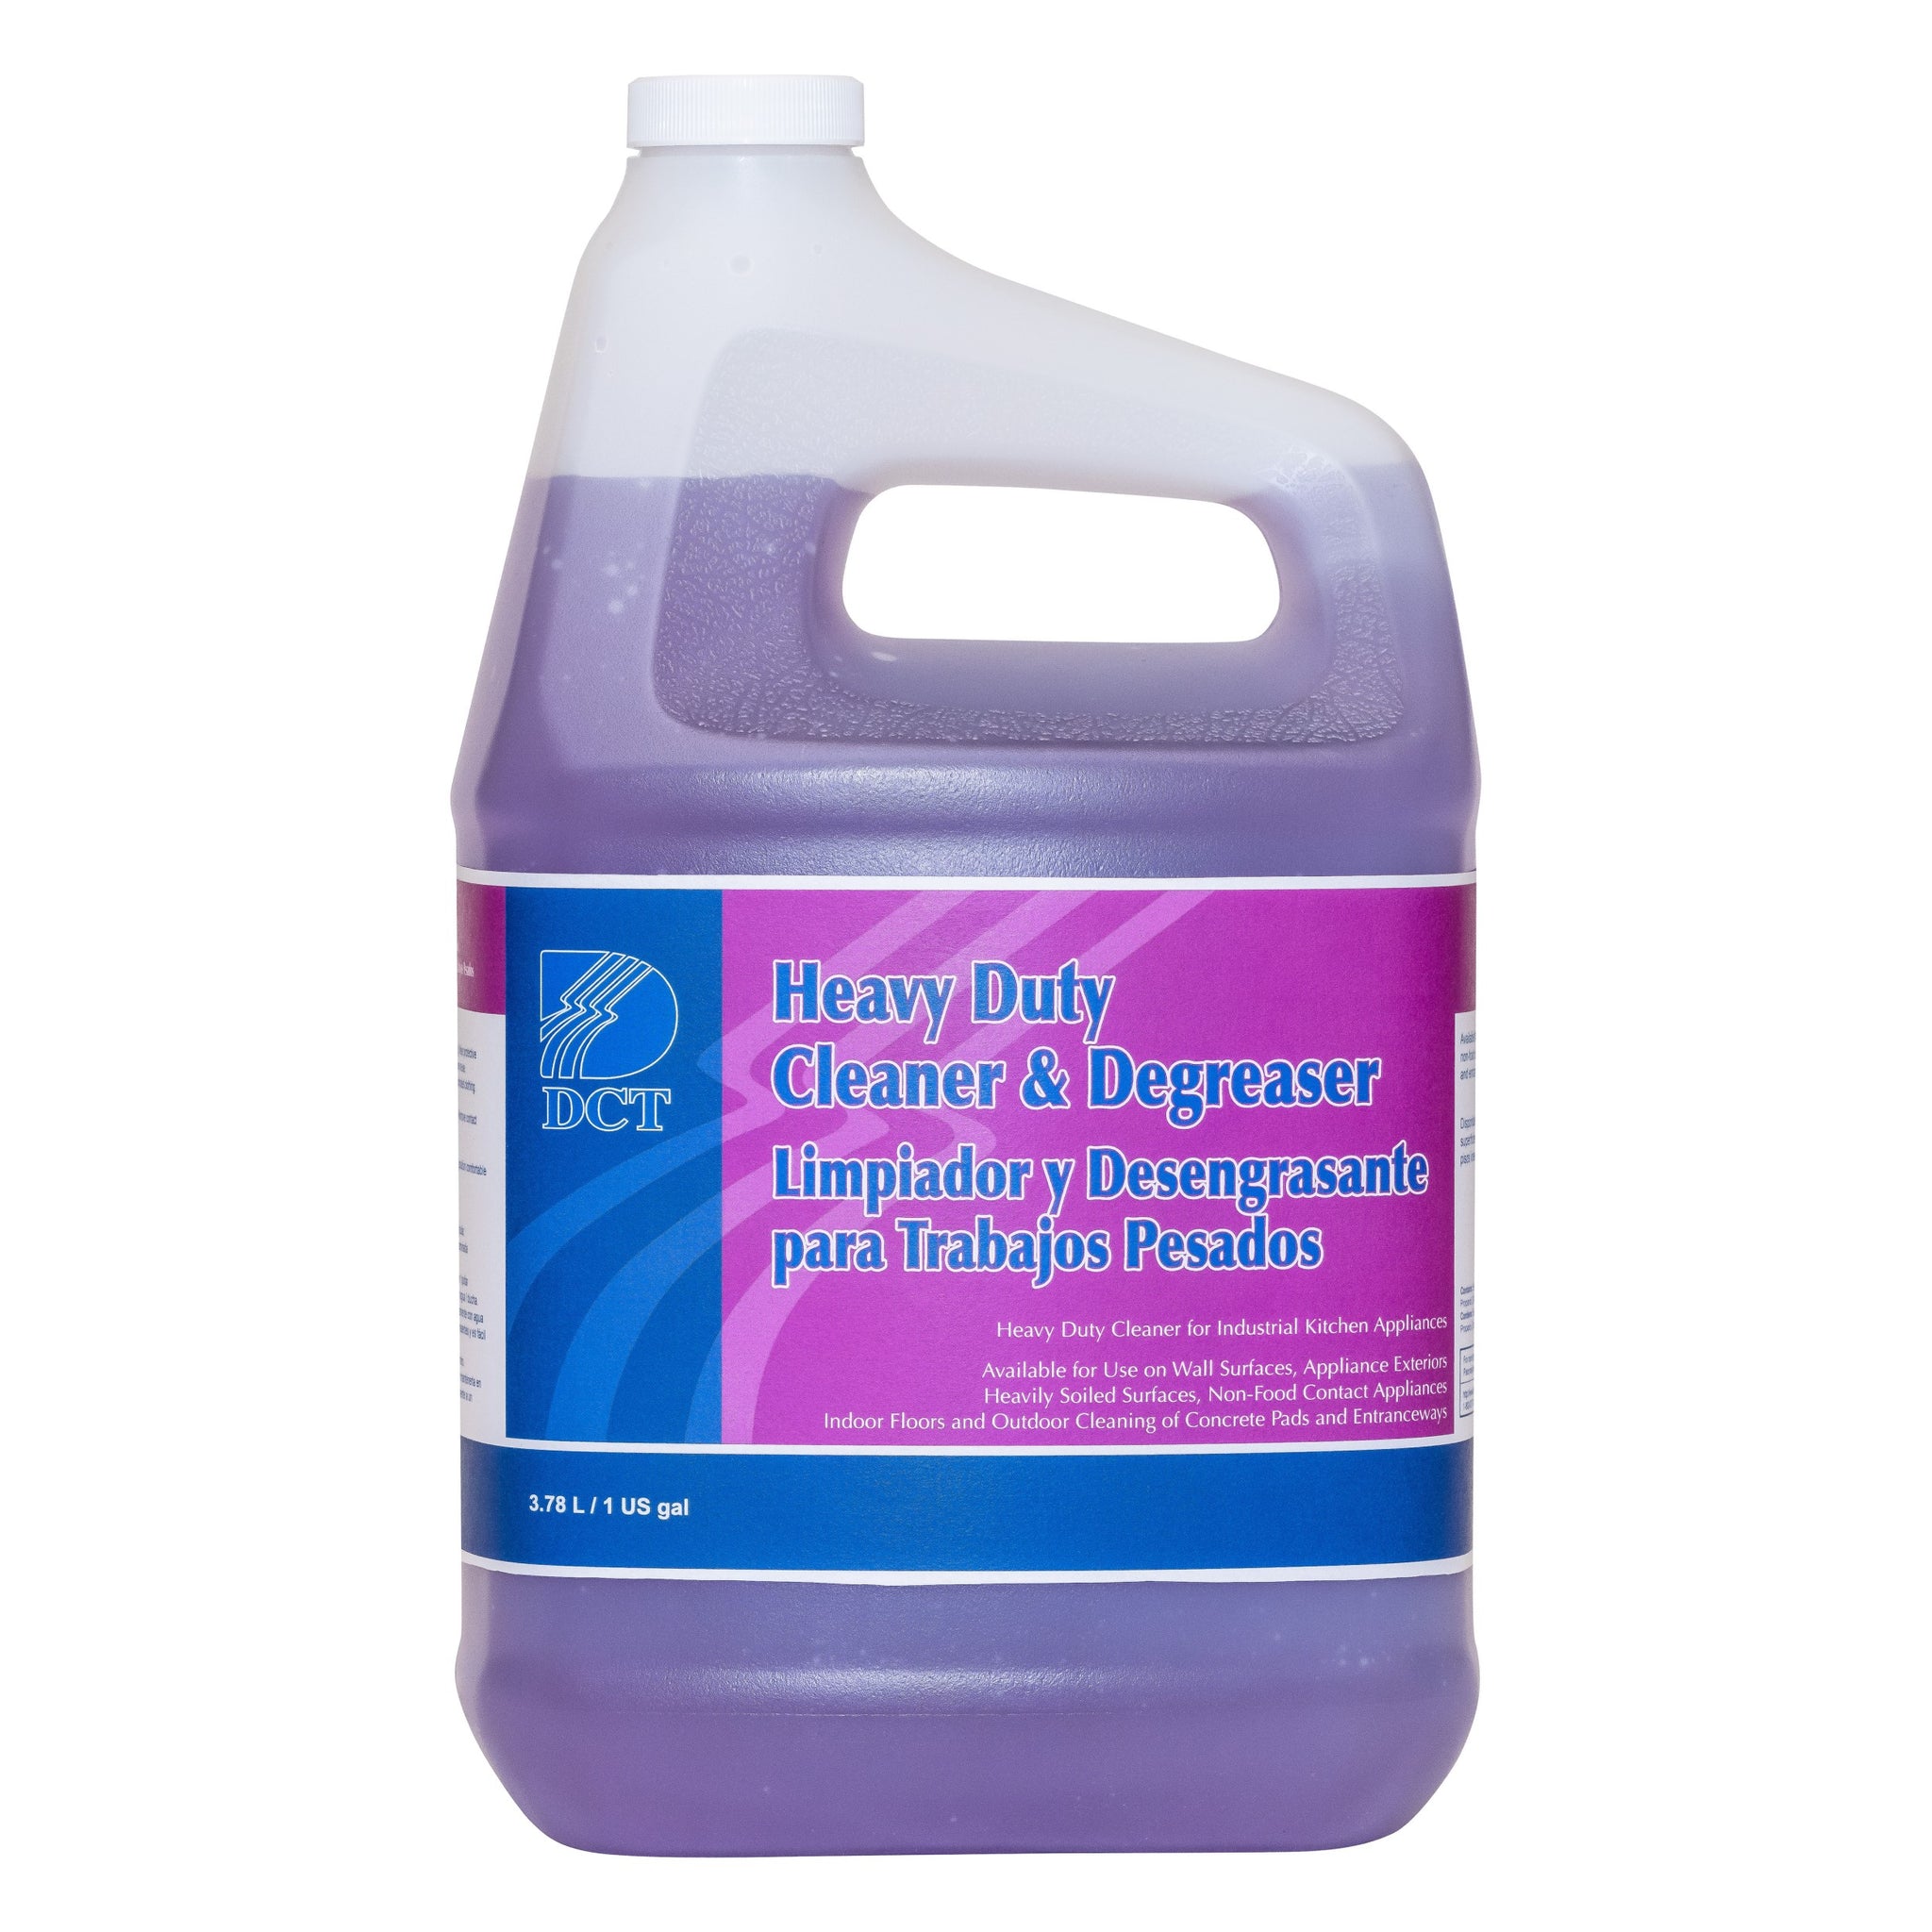 I scrubbed my hearth with purple power degreaser (and other